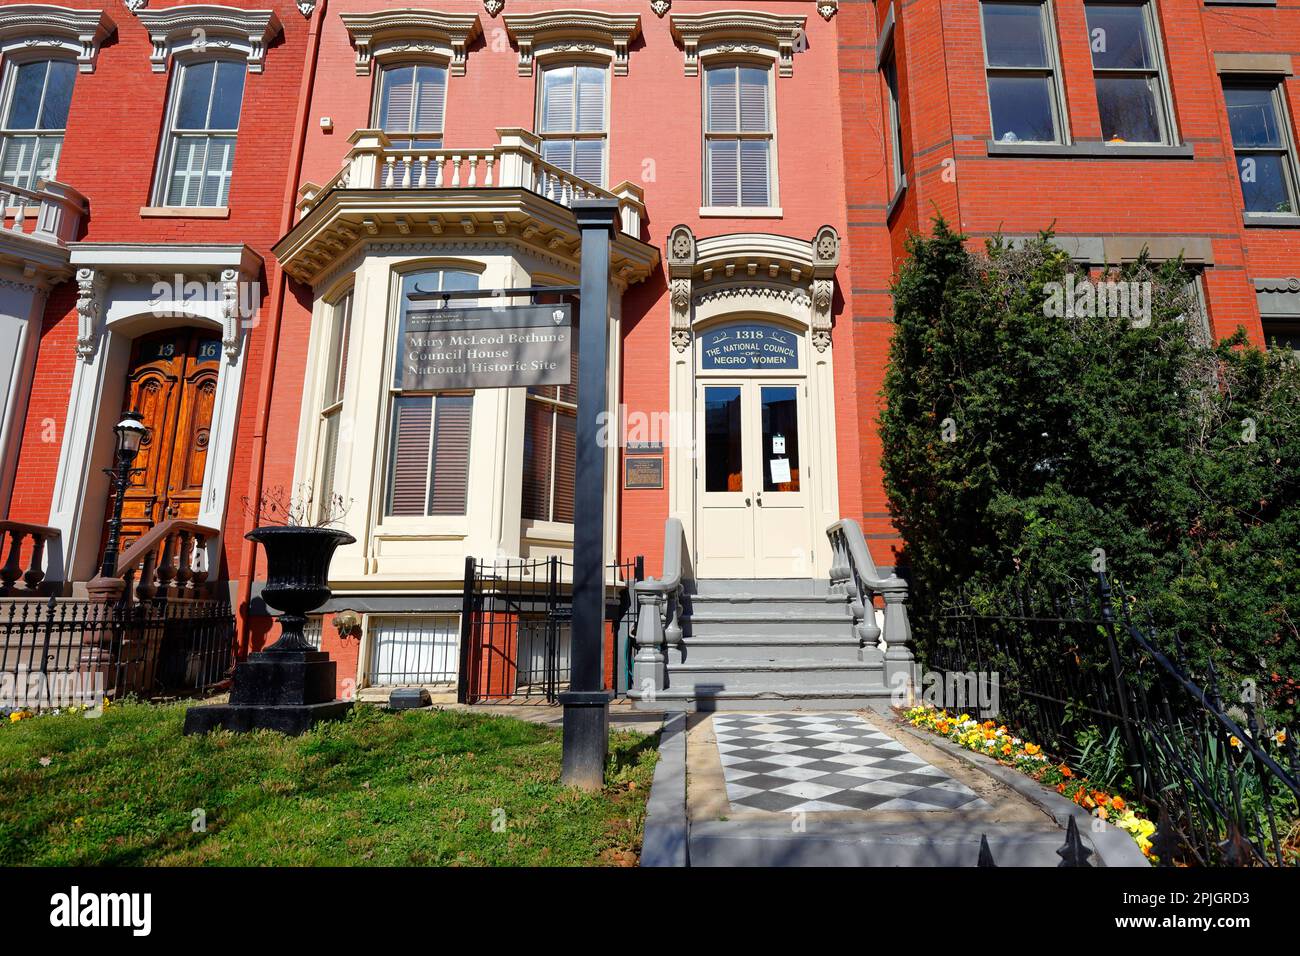 Mary McLeod Bethune Council House National Historic Site, 1318 Vermont Ave NW, Washington DC. exterior of a civil rights history museum. Stock Photo